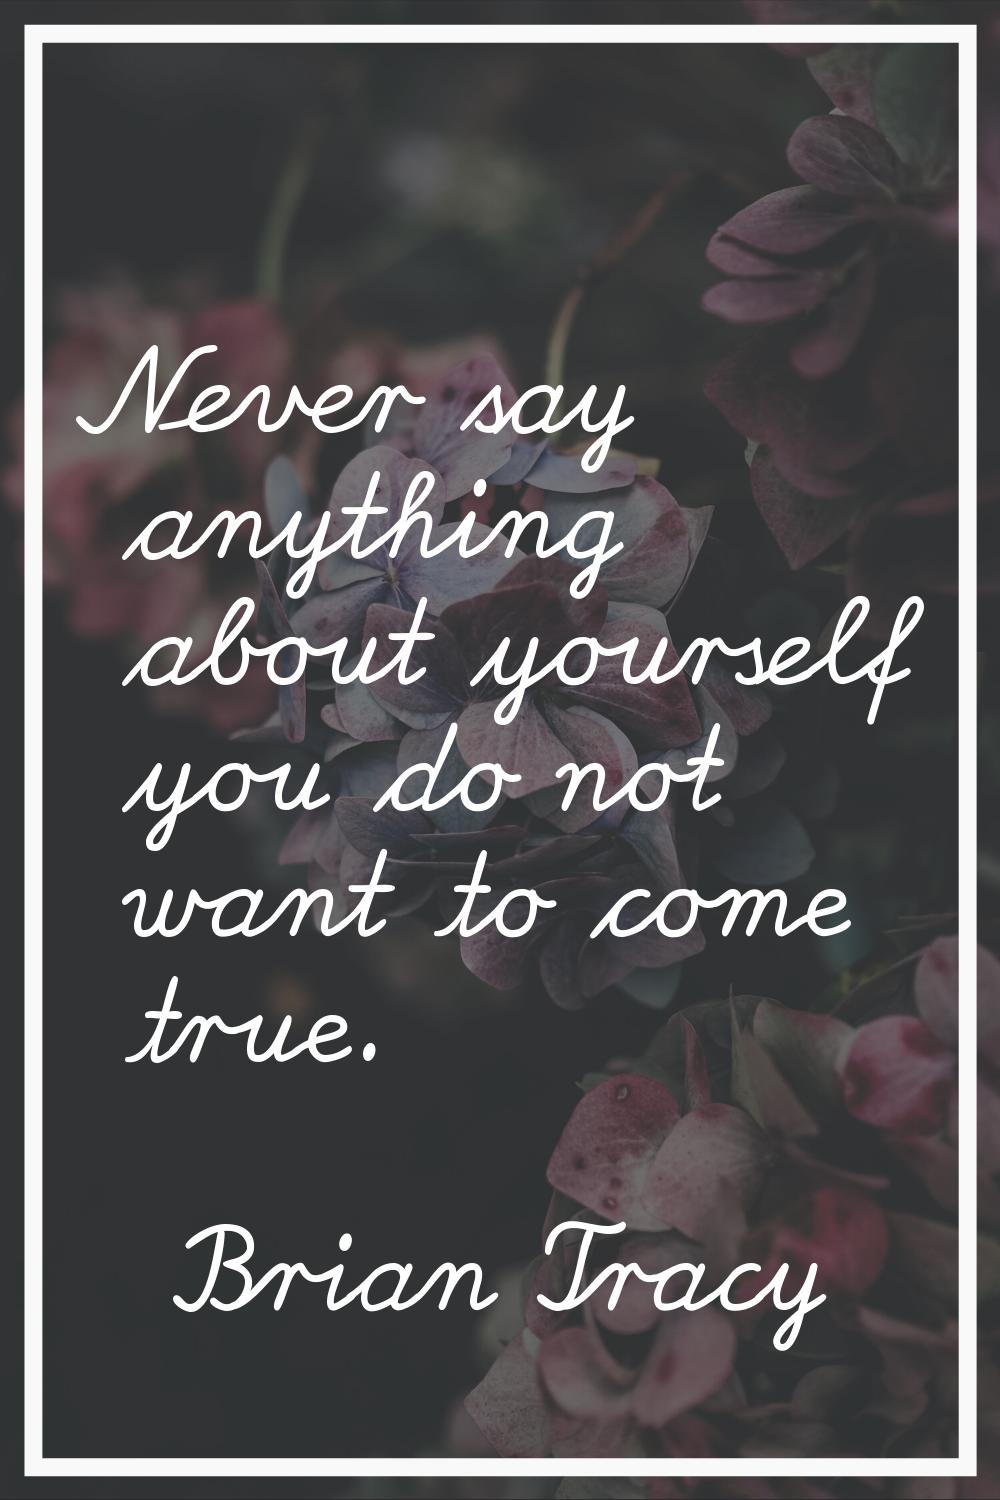 Never say anything about yourself you do not want to come true.